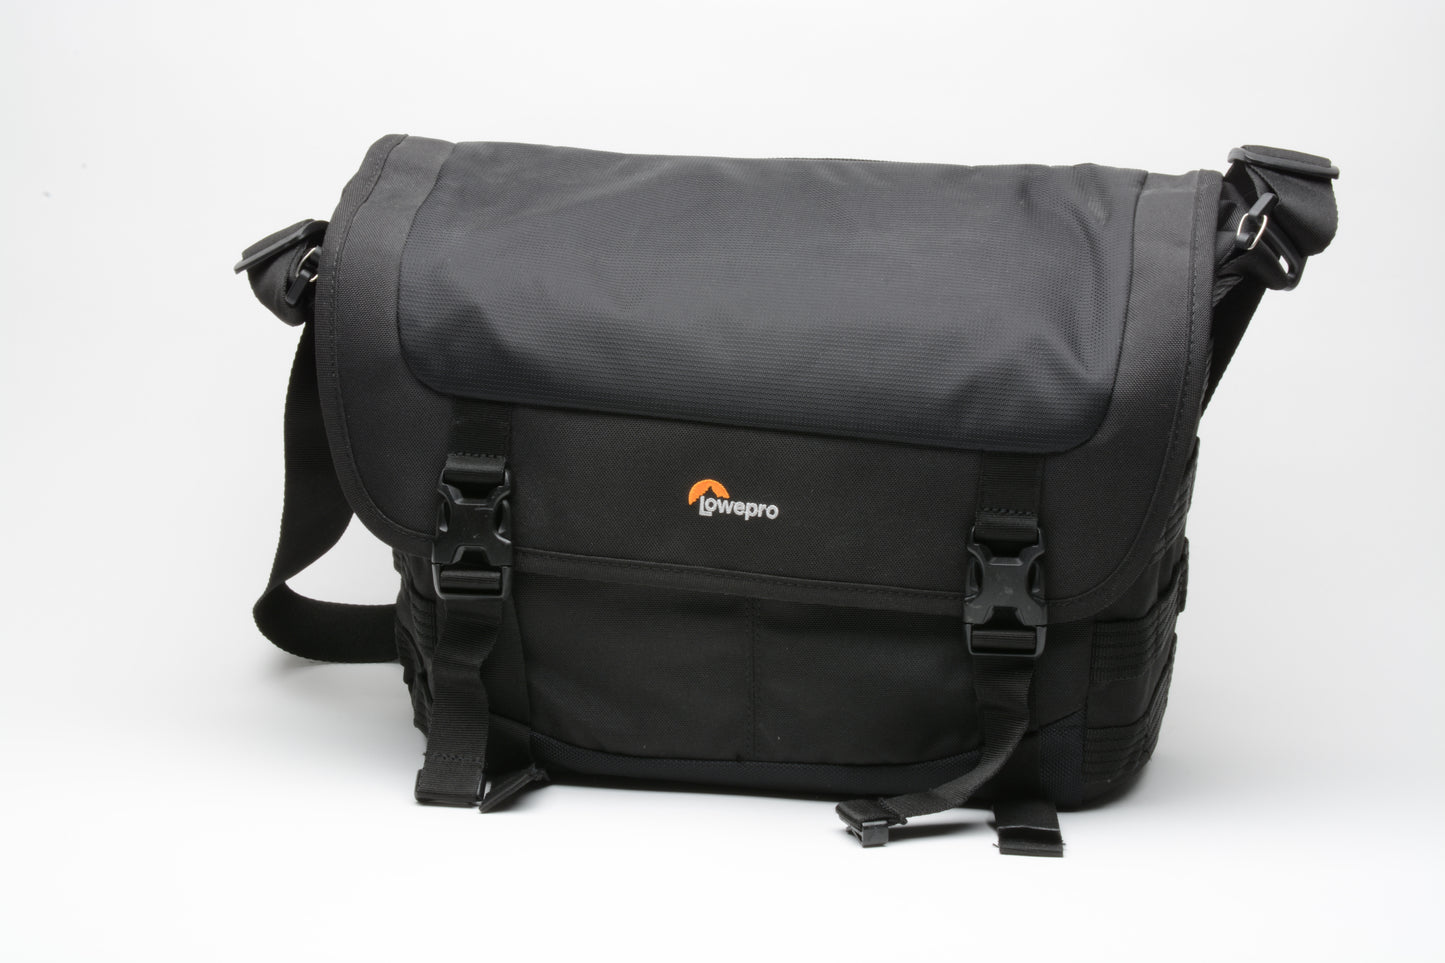 Lowepro Pro Tactic MG 160 AW II Camera Messenger bag (Black) Very clean